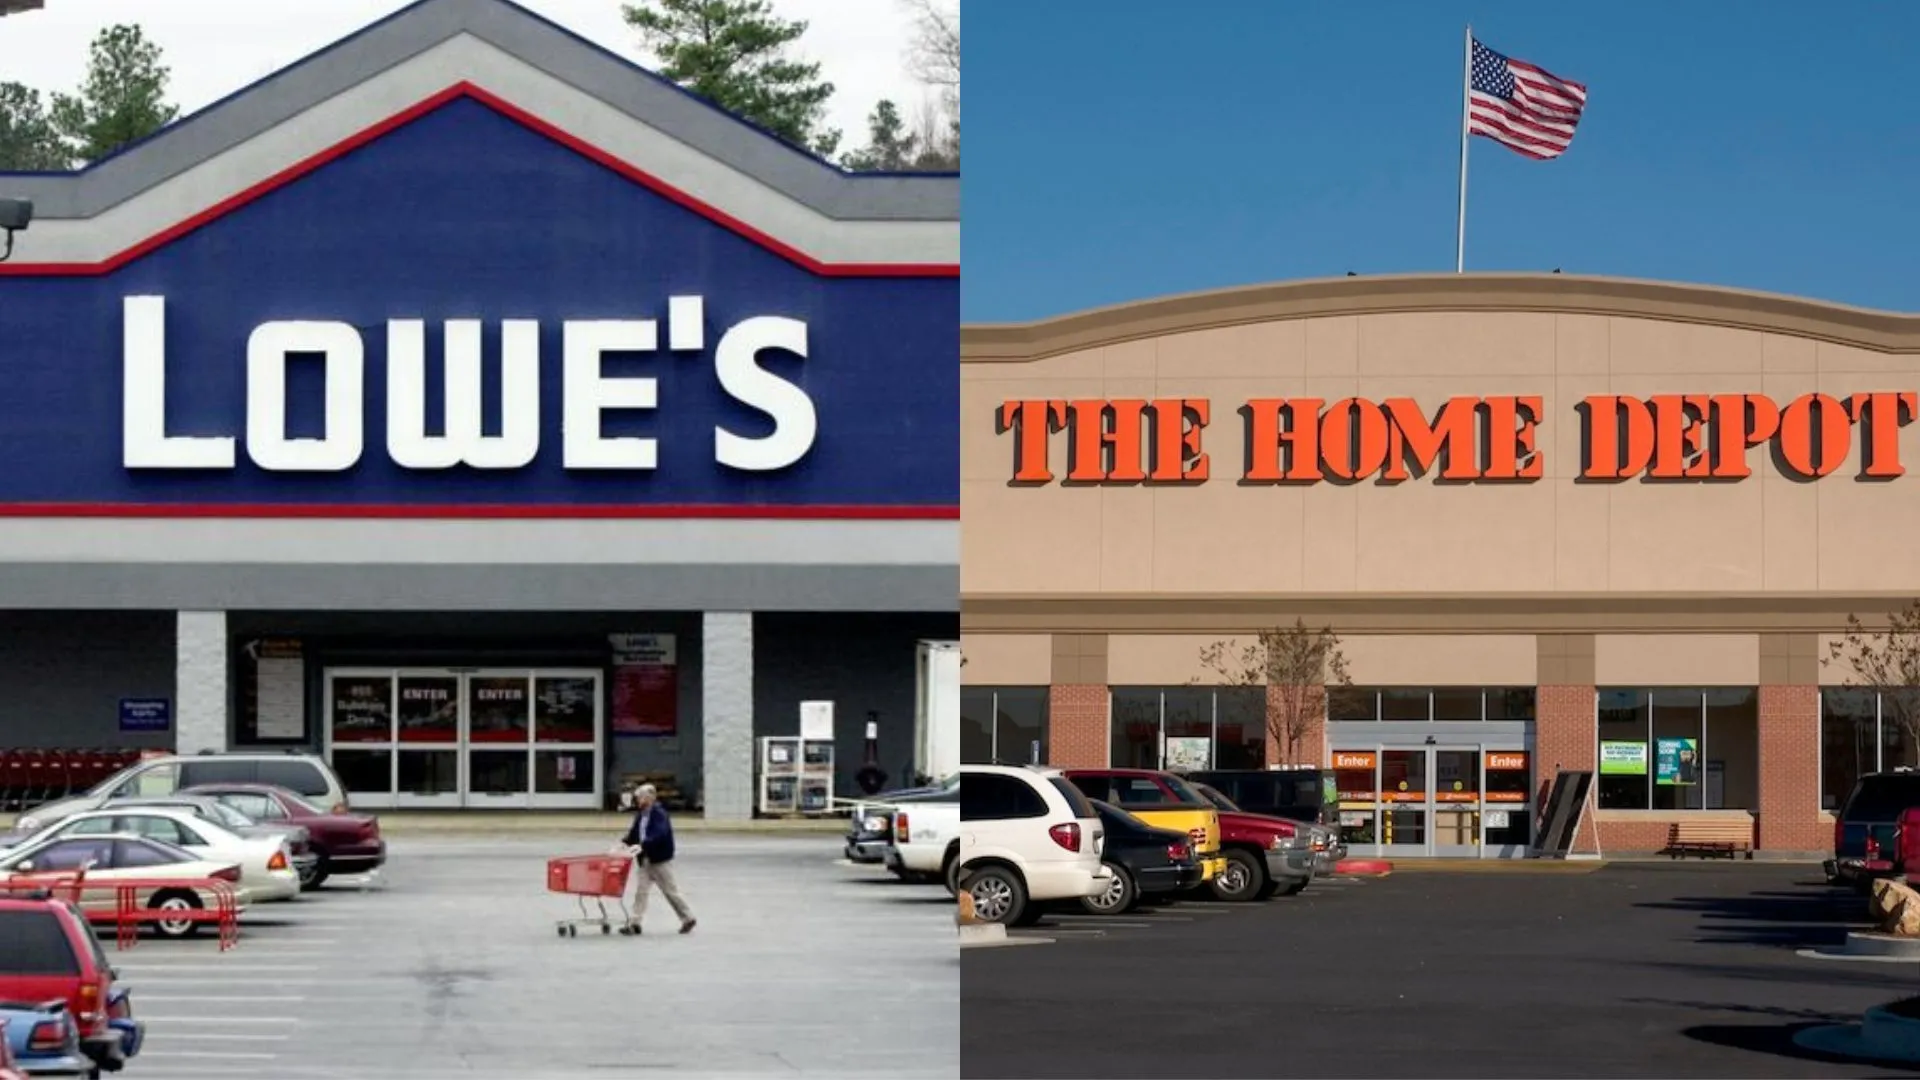 Is Home Depot owned by Lowes?